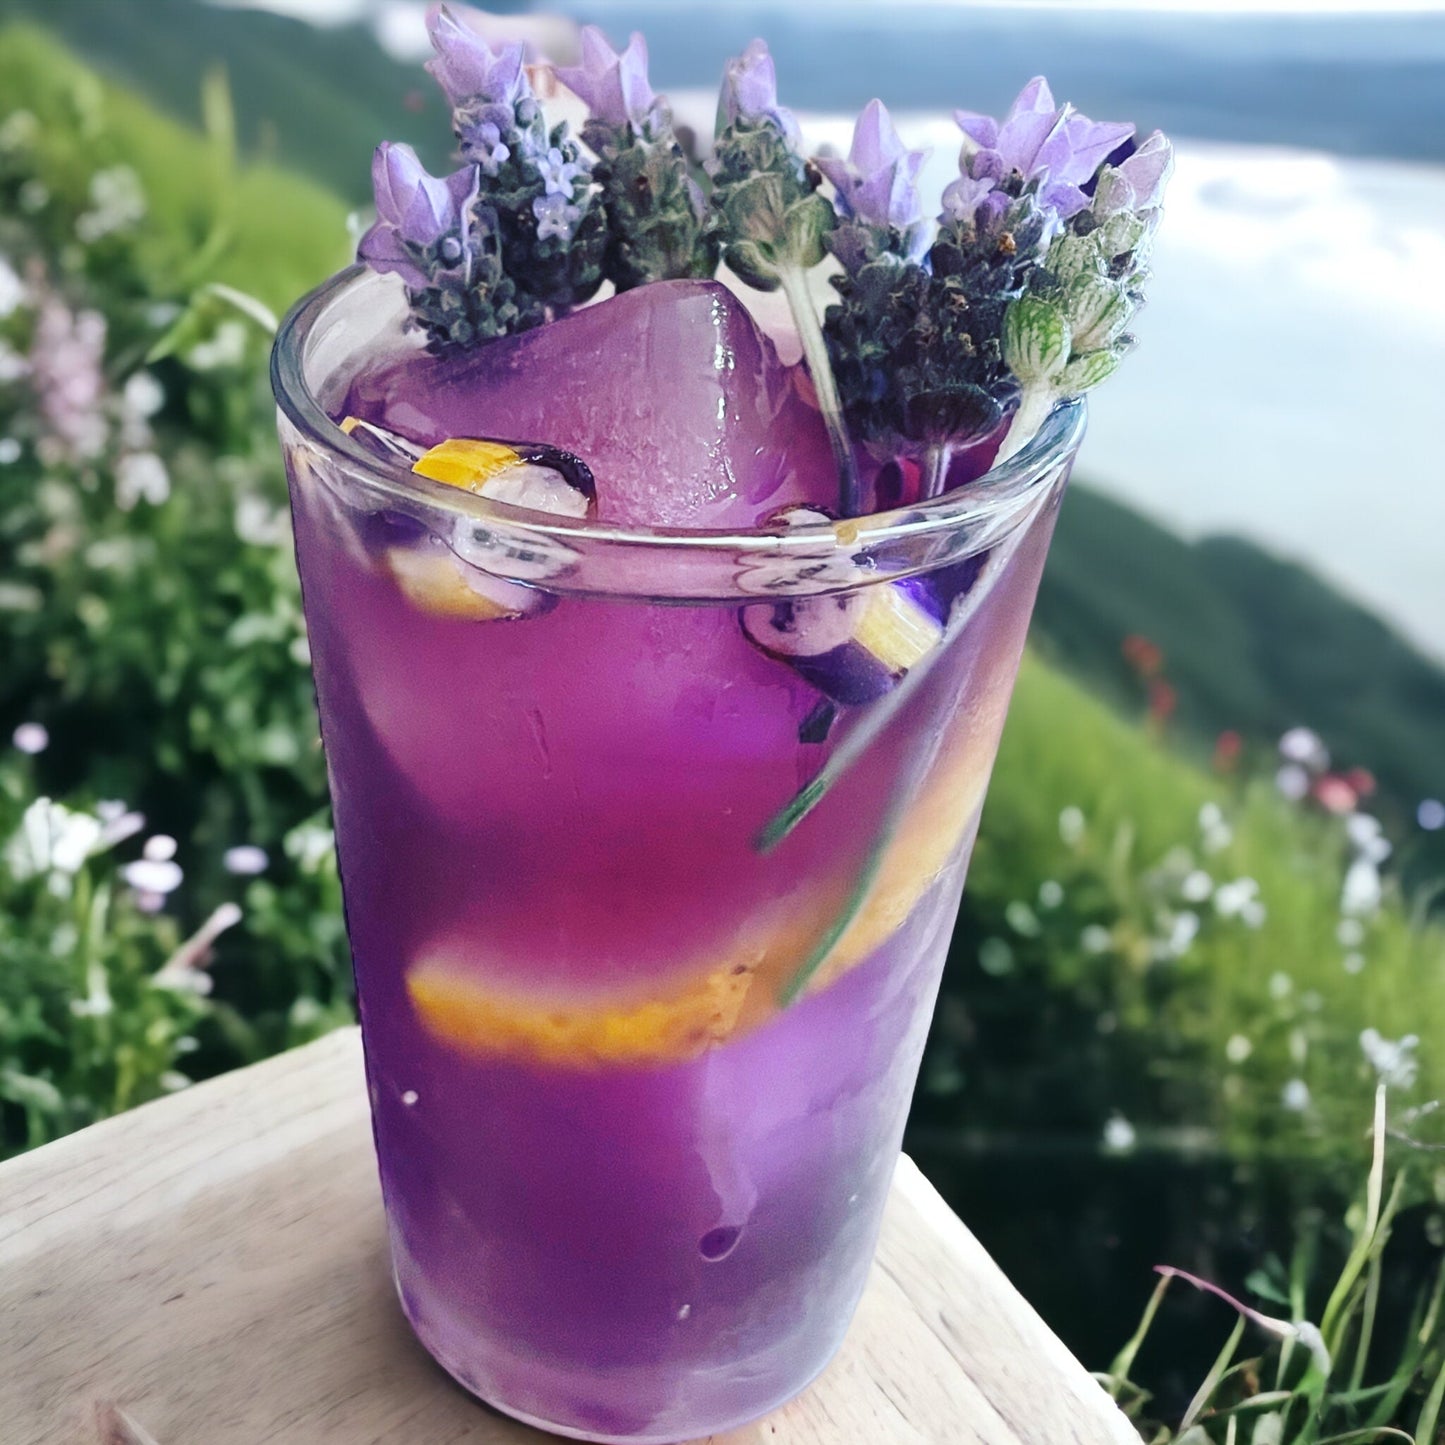 This picture shows a beautiful Blue Butterfly Pea Flower ice tea. The tea is a purple colour, served with lemon, and ice cubes and it is sitting on a wooden outdoor table.